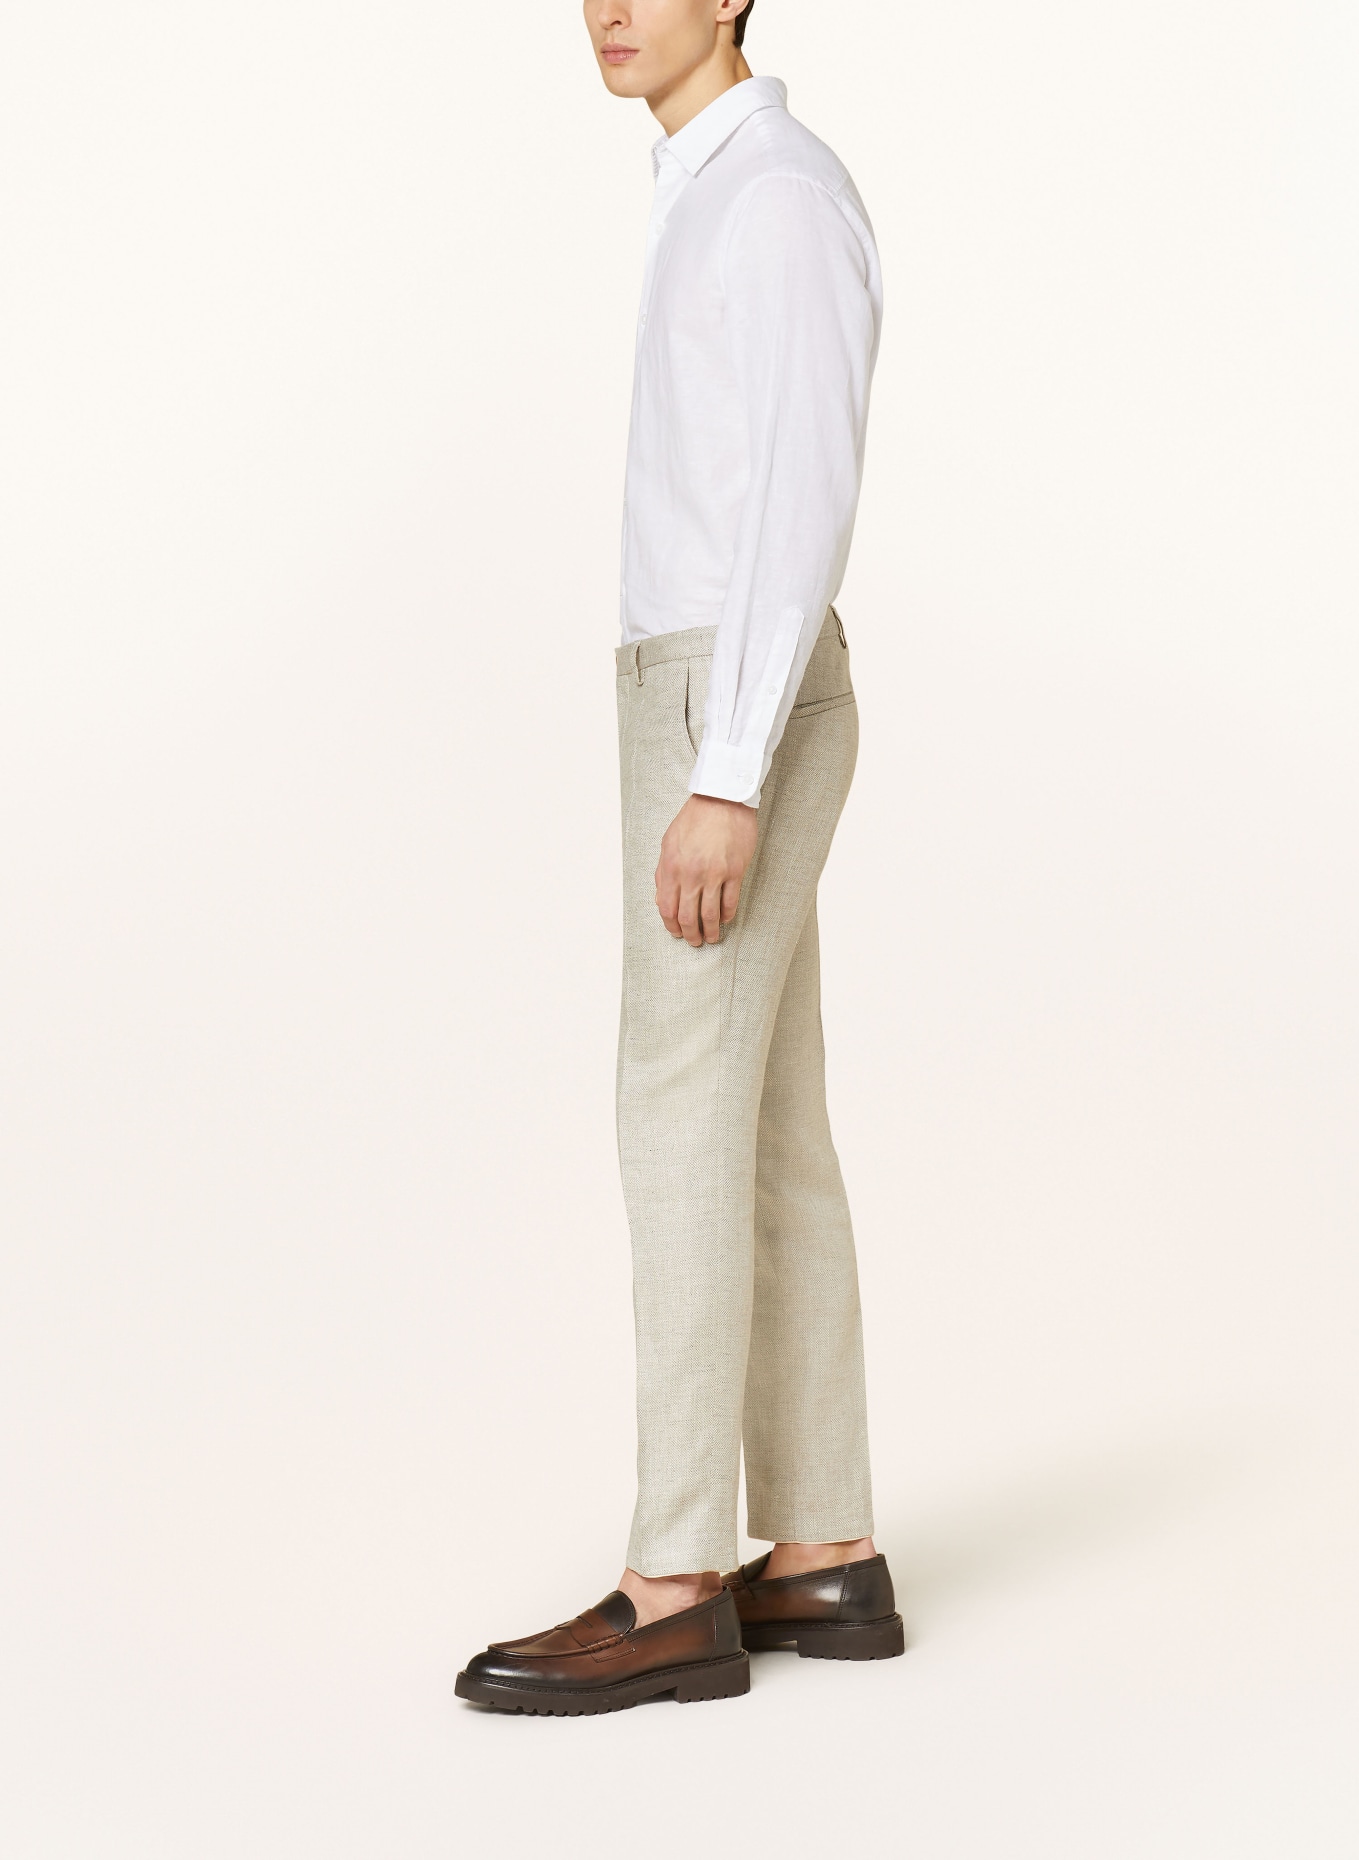 CG - CLUB of GENTS Suit trousers CG PACO slim fit with linen, Color: 21 beige hell (Image 5)